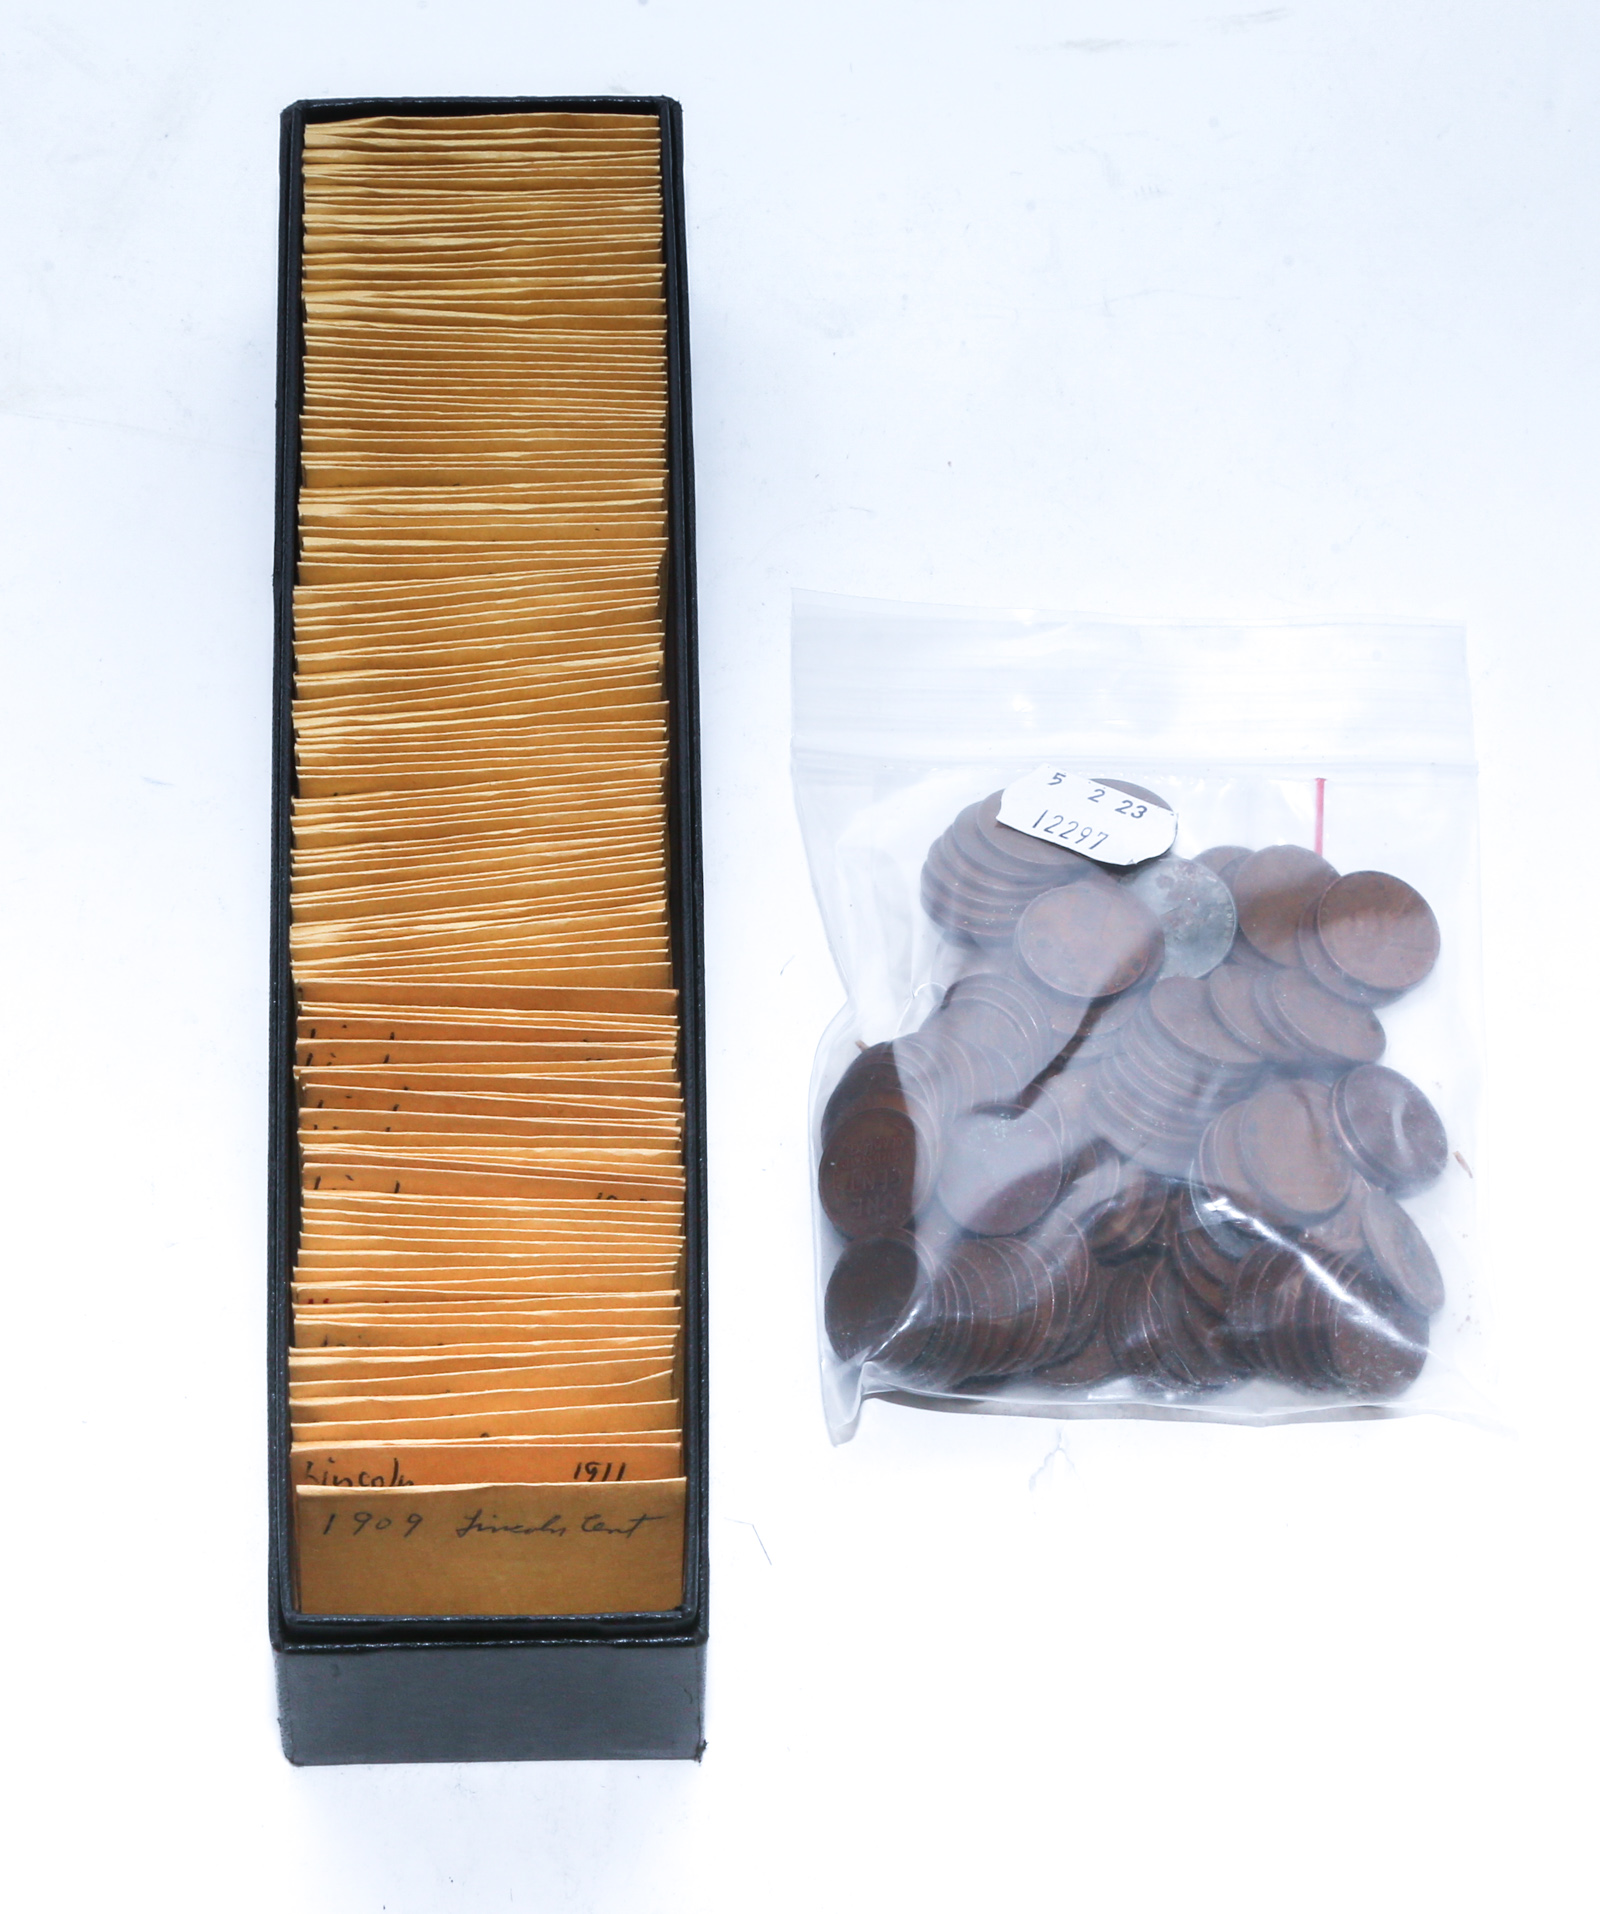 LINCOLN CENT COLLECTION - 120+